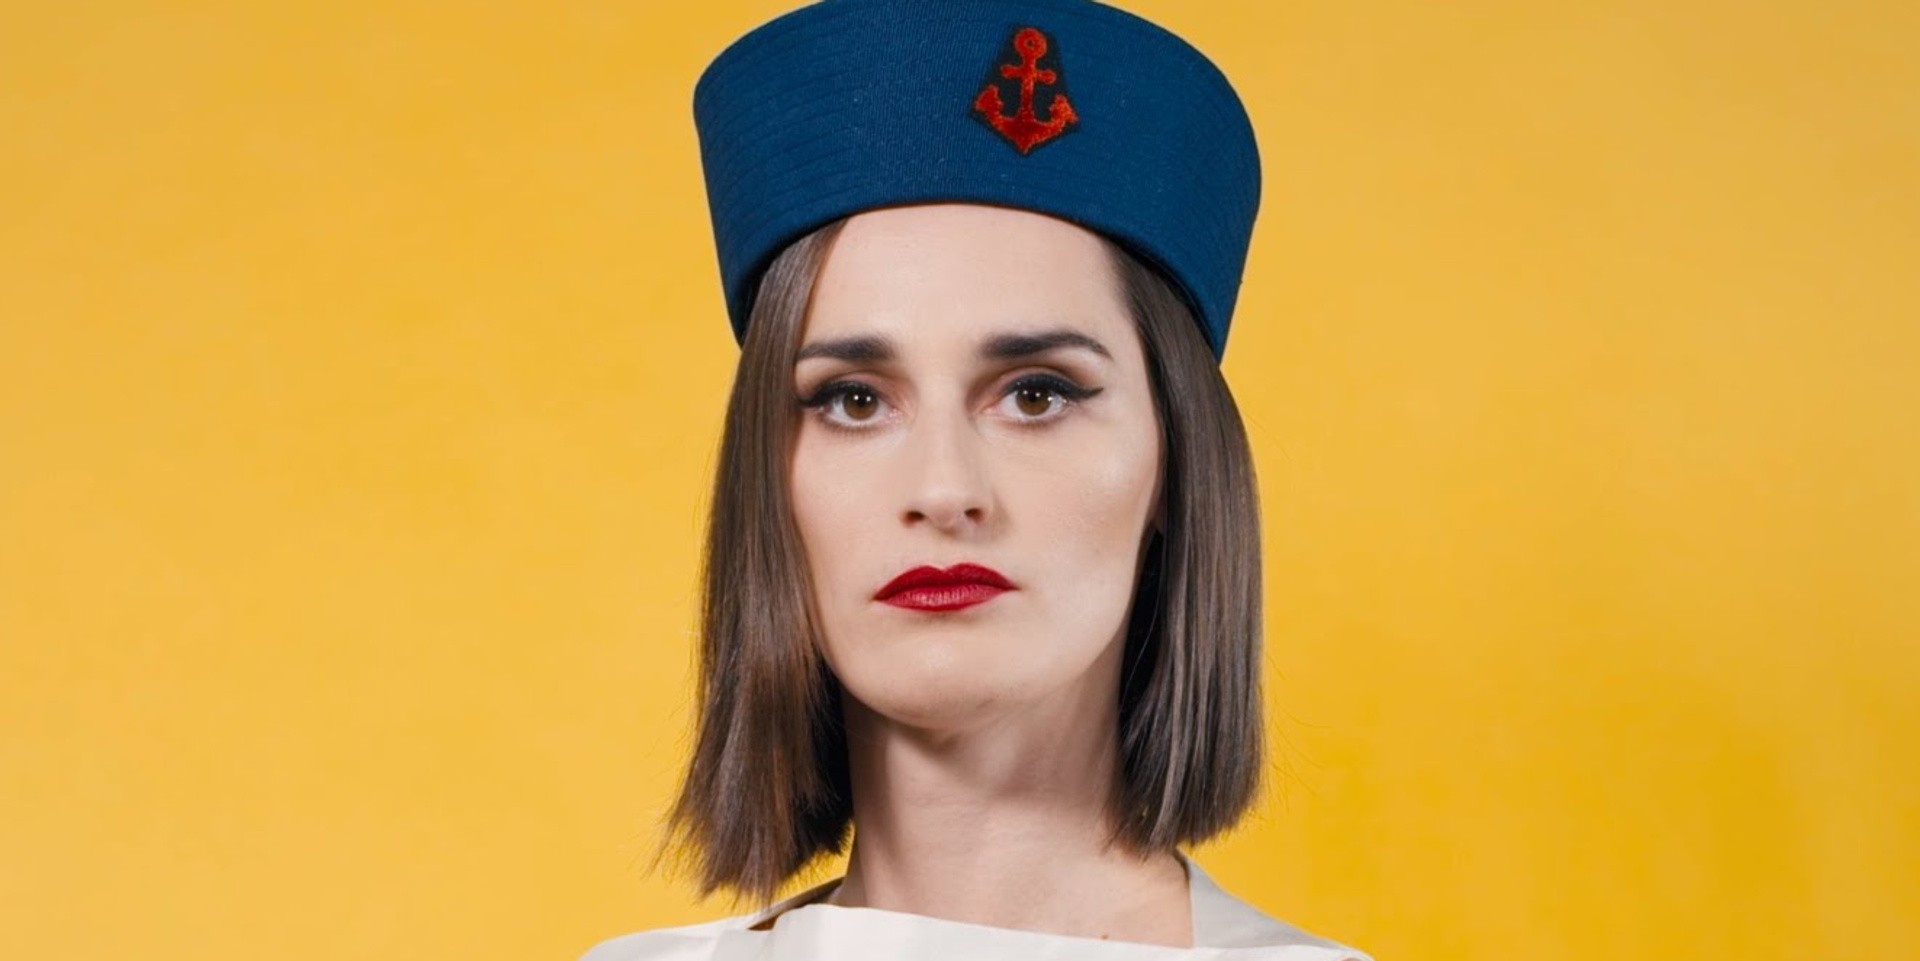 French electro-pop duo Yelle to perform in Singapore